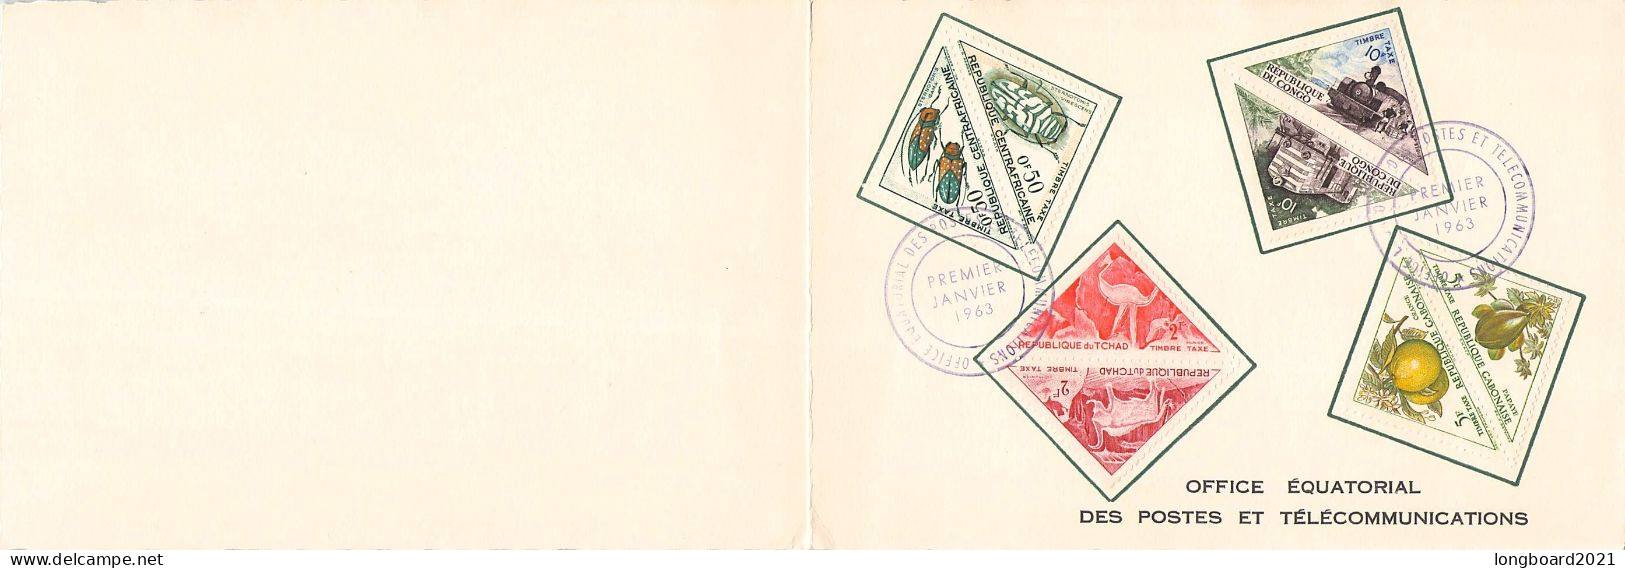 GABON - CARD WITH 4 STAMPS FOR HAPPY NEW YEAR 1963 /4505 - Gabon (1960-...)